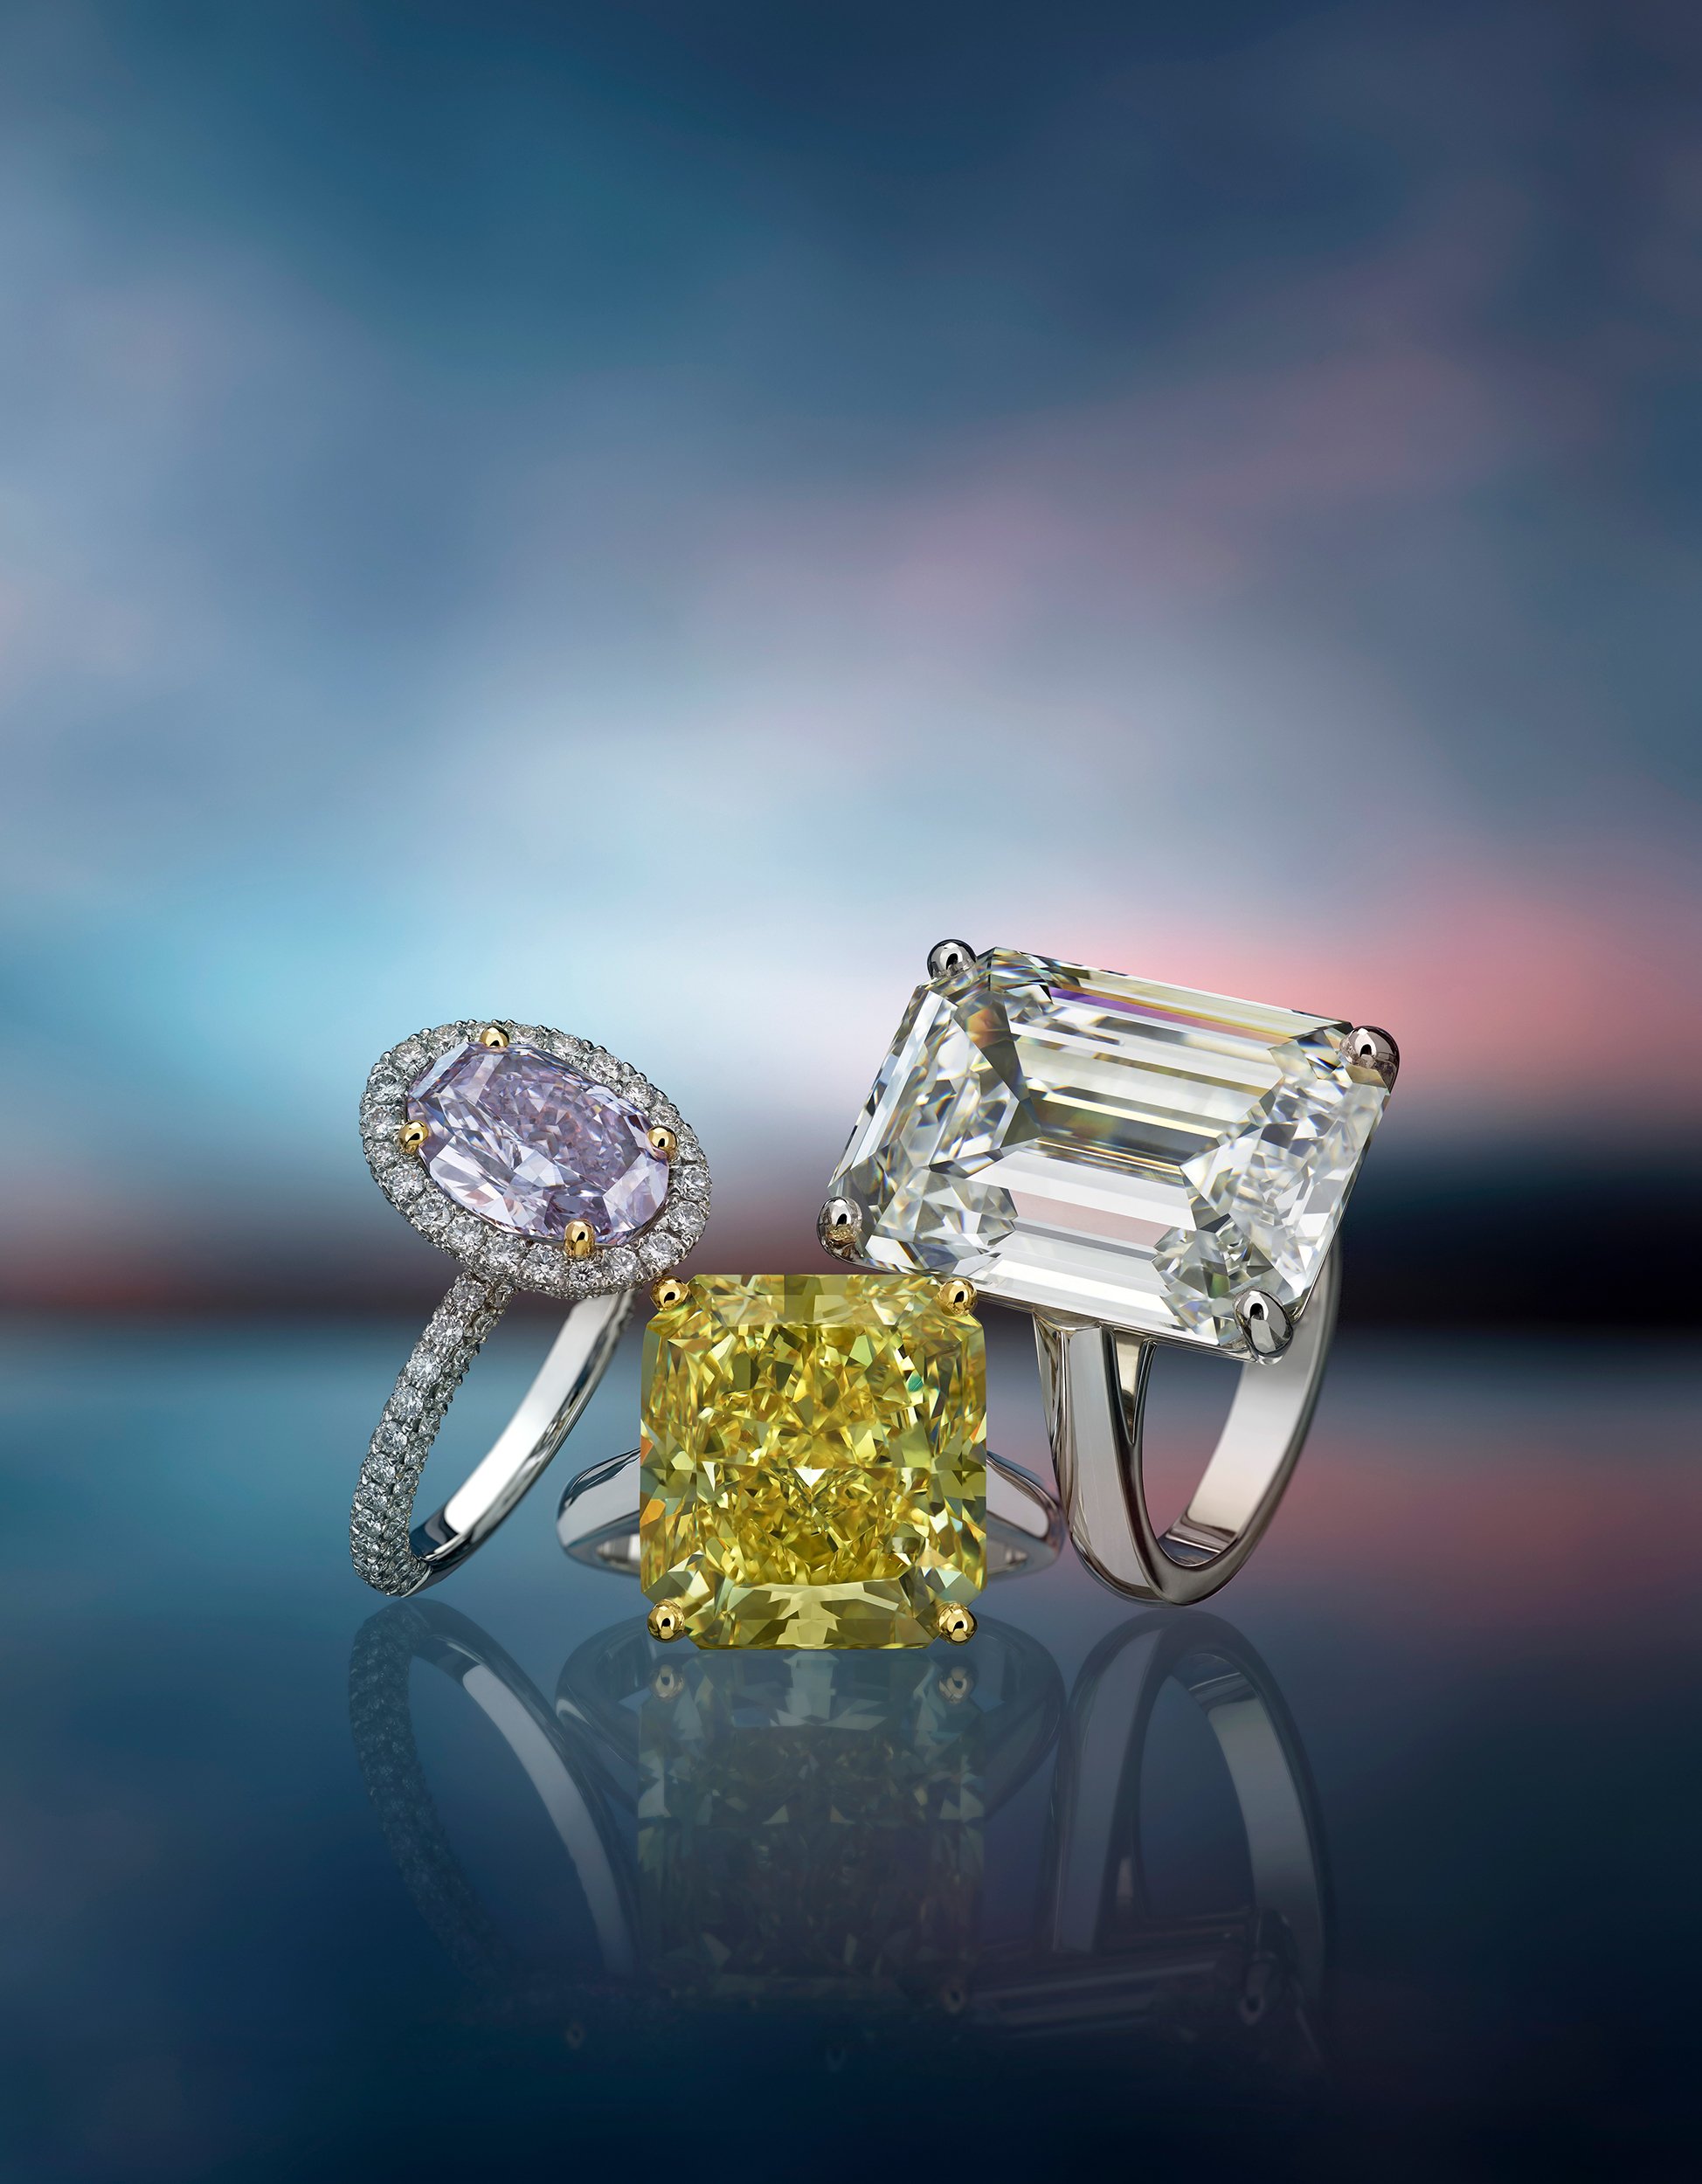  De Beers diamond rings shot for the Masterbrand campaign 